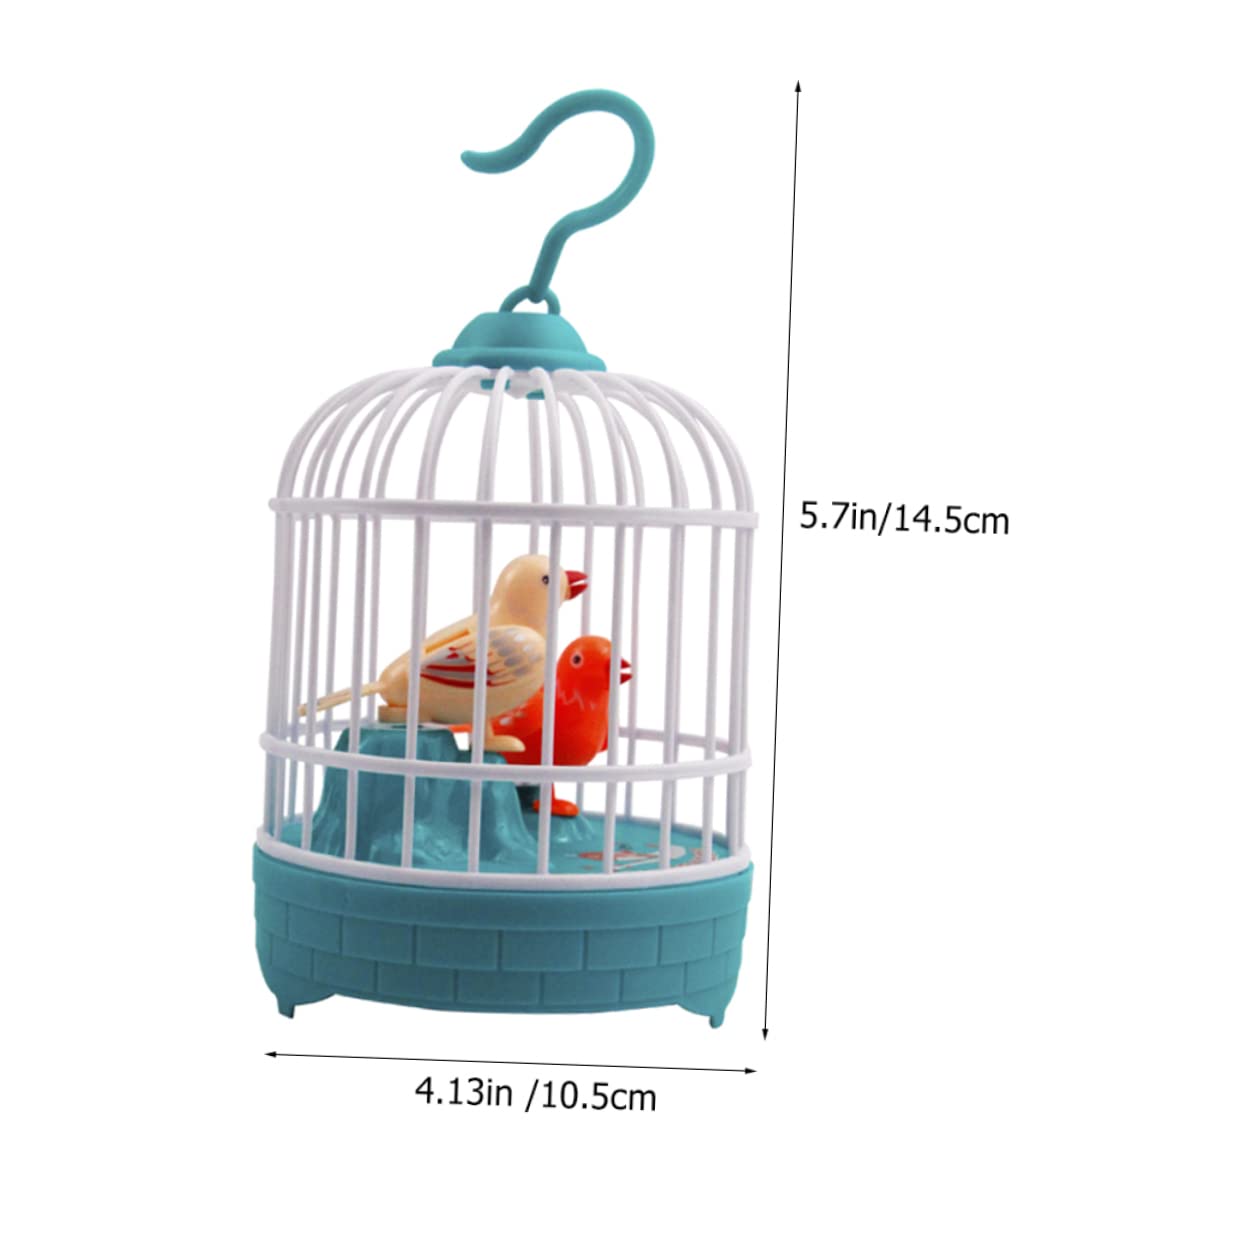 BESTOYARD 5pcs Children's Birdcage Voice-Activated Induction Birds Electronic Birds Toy Sound Electric Bird Cage Toy Singing Chirping Bird Live Pets Mother Voice Control Plastic Musical Bird